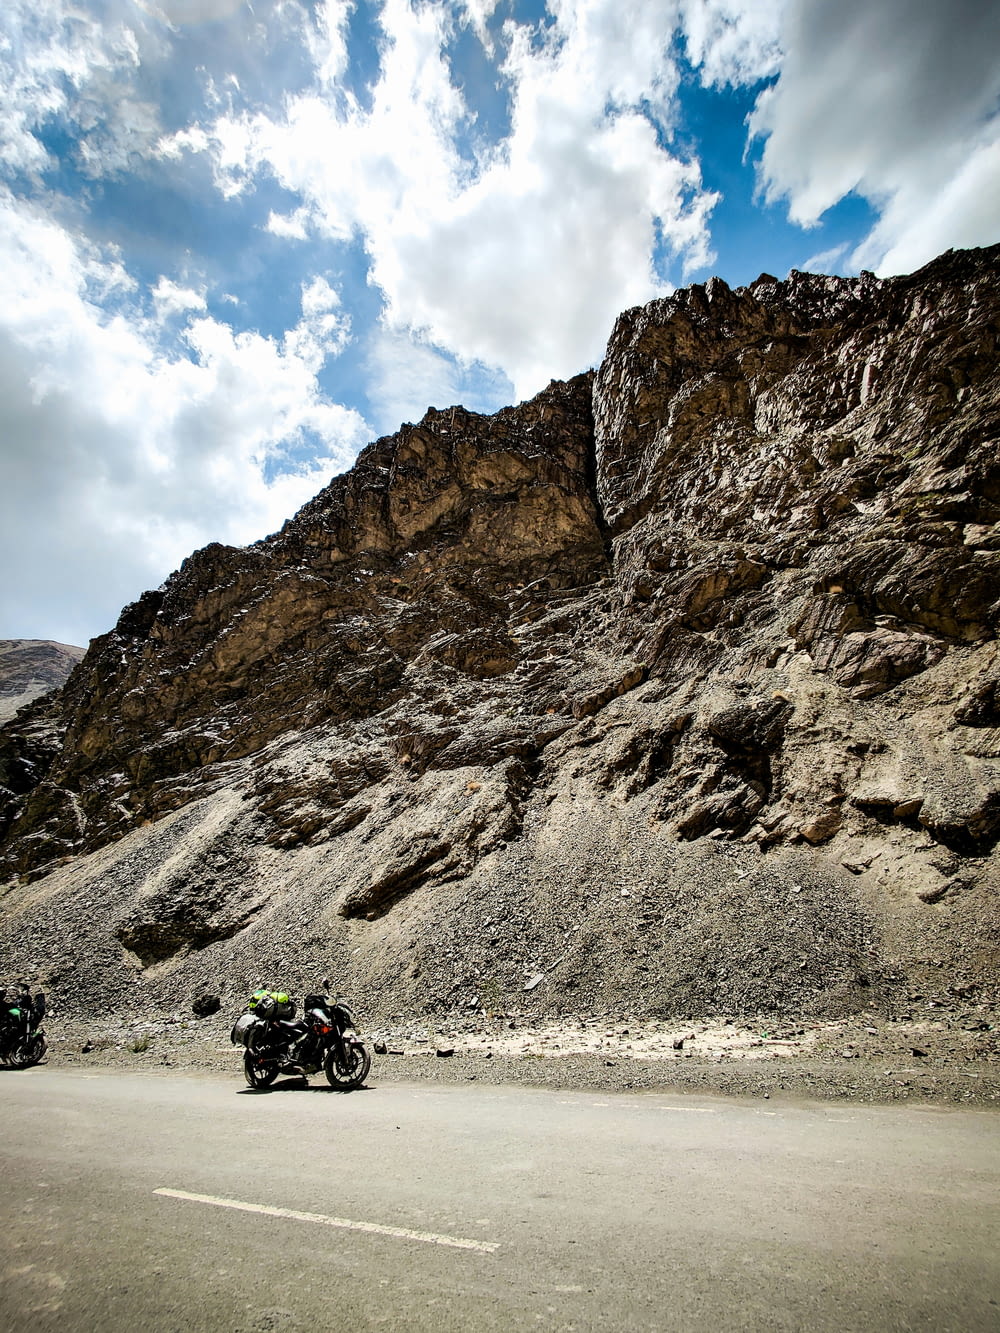 a group of motorcycles parked on a road next to a large rock